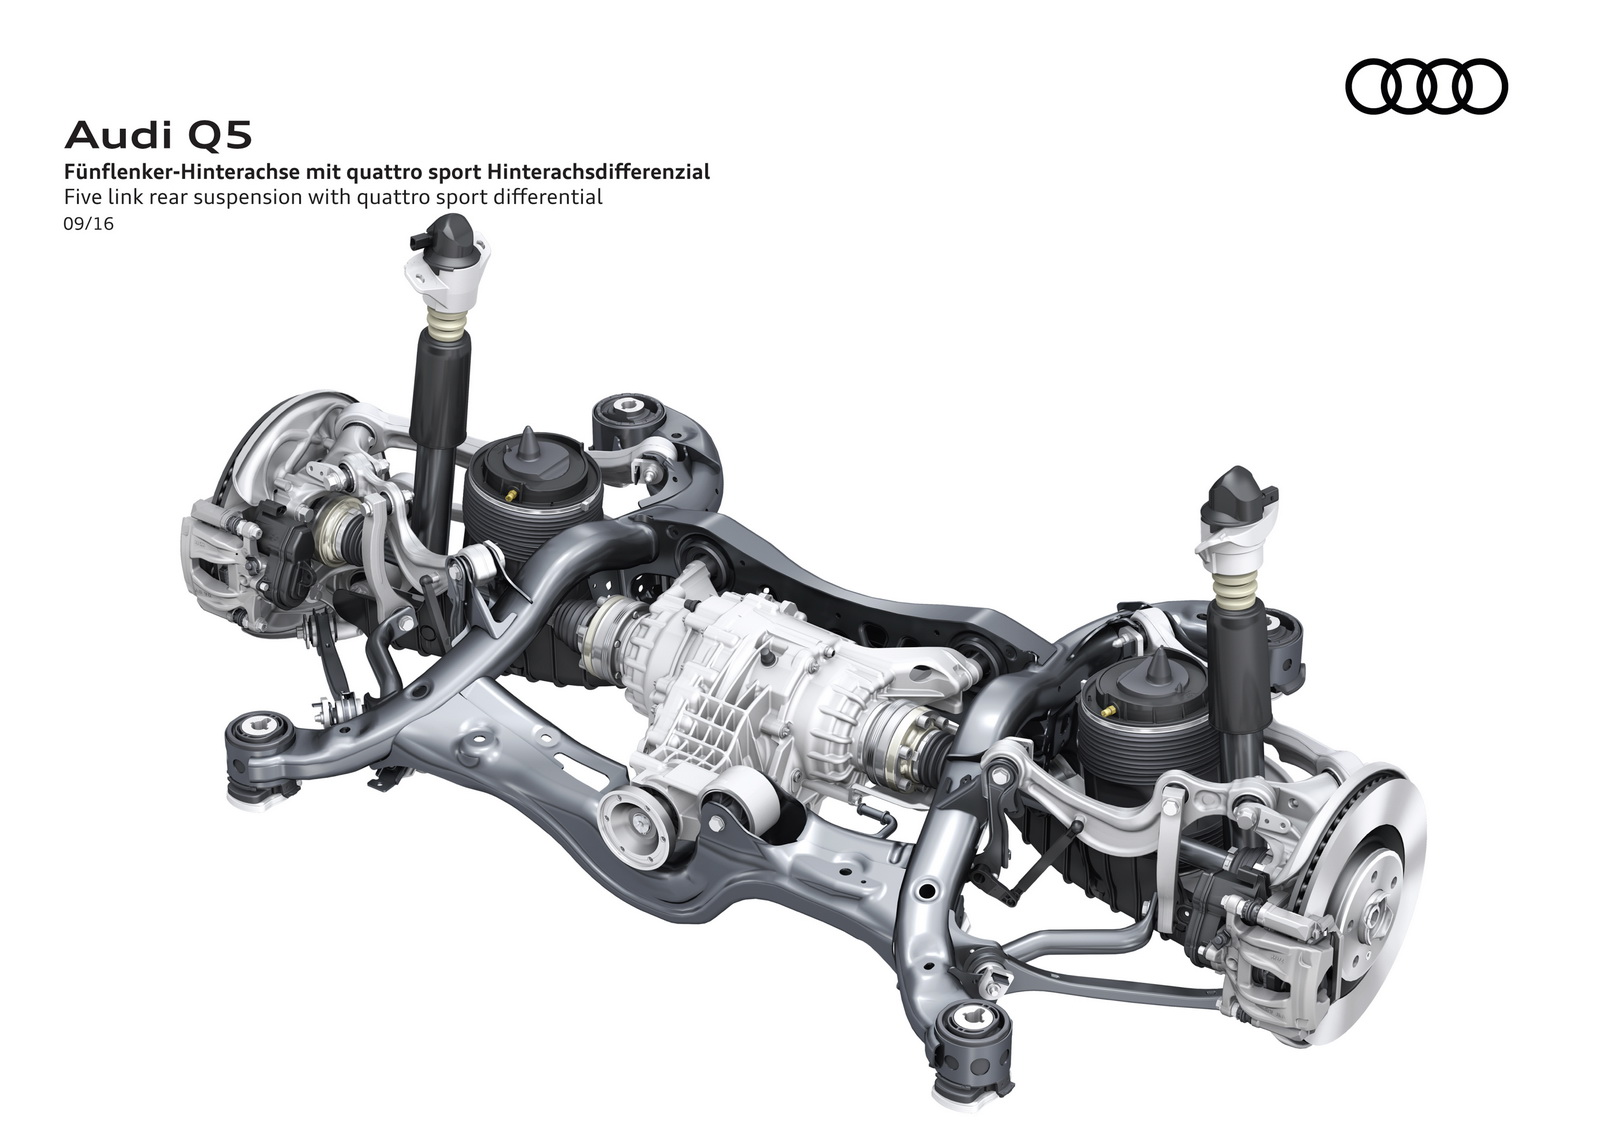 Five link rear suspension with quattro sport differential